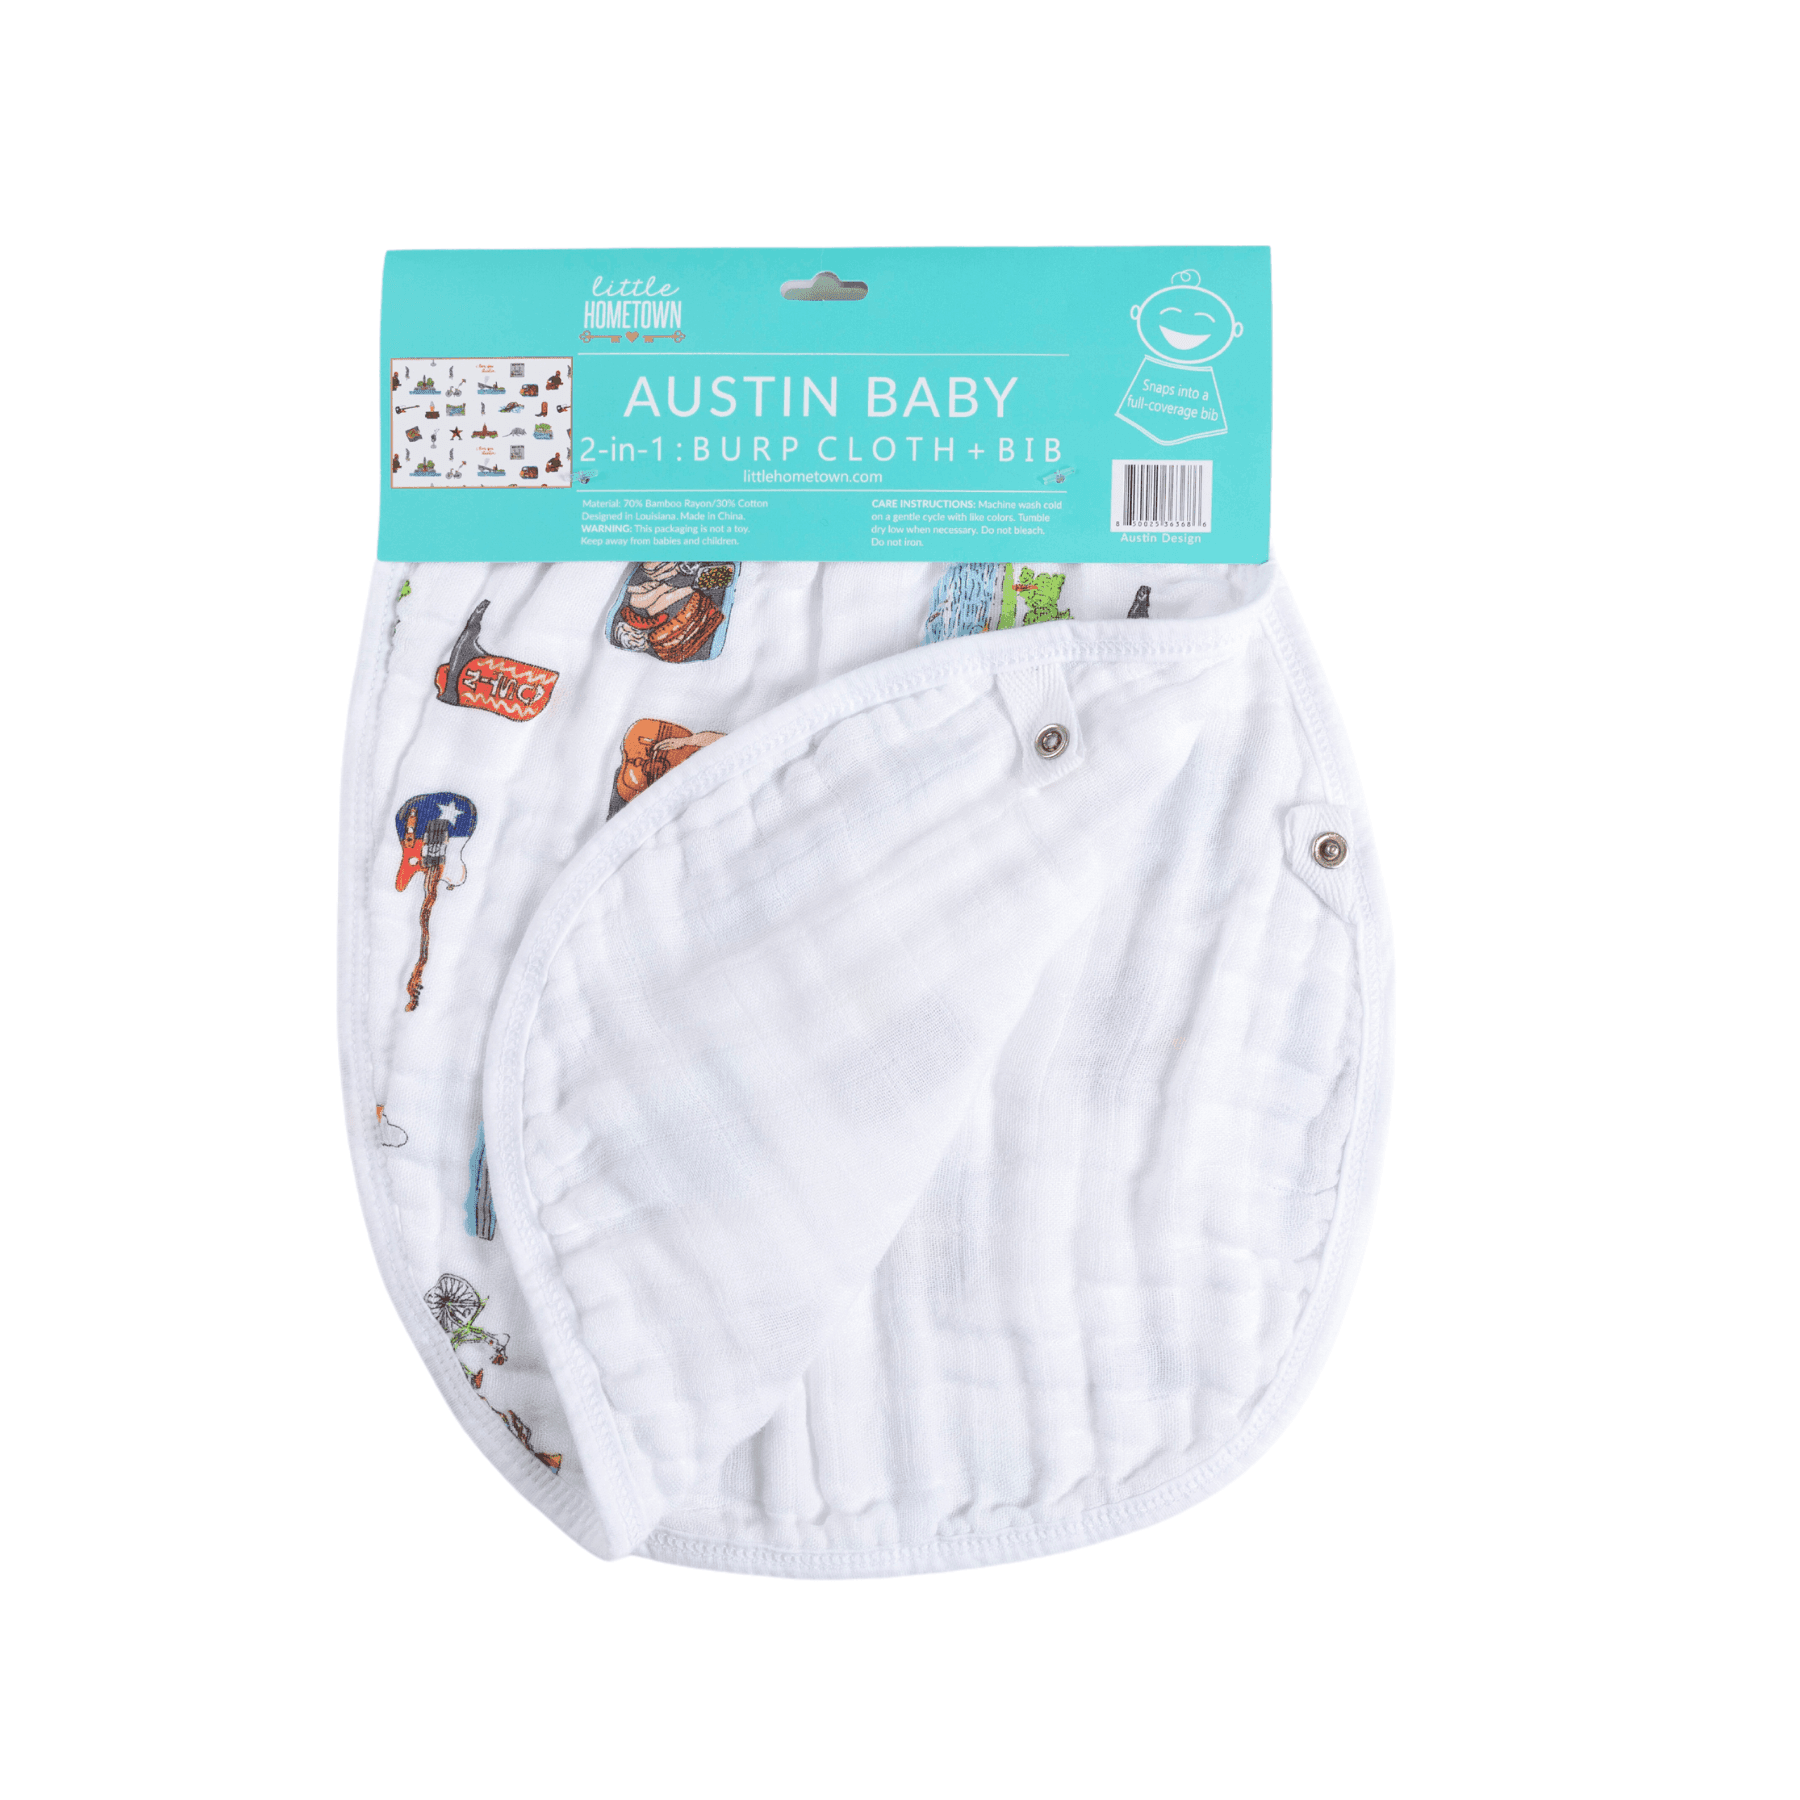 Austin-themed baby muslin swaddle blanket and burp cloth set featuring Texas icons in soft pastel colors.